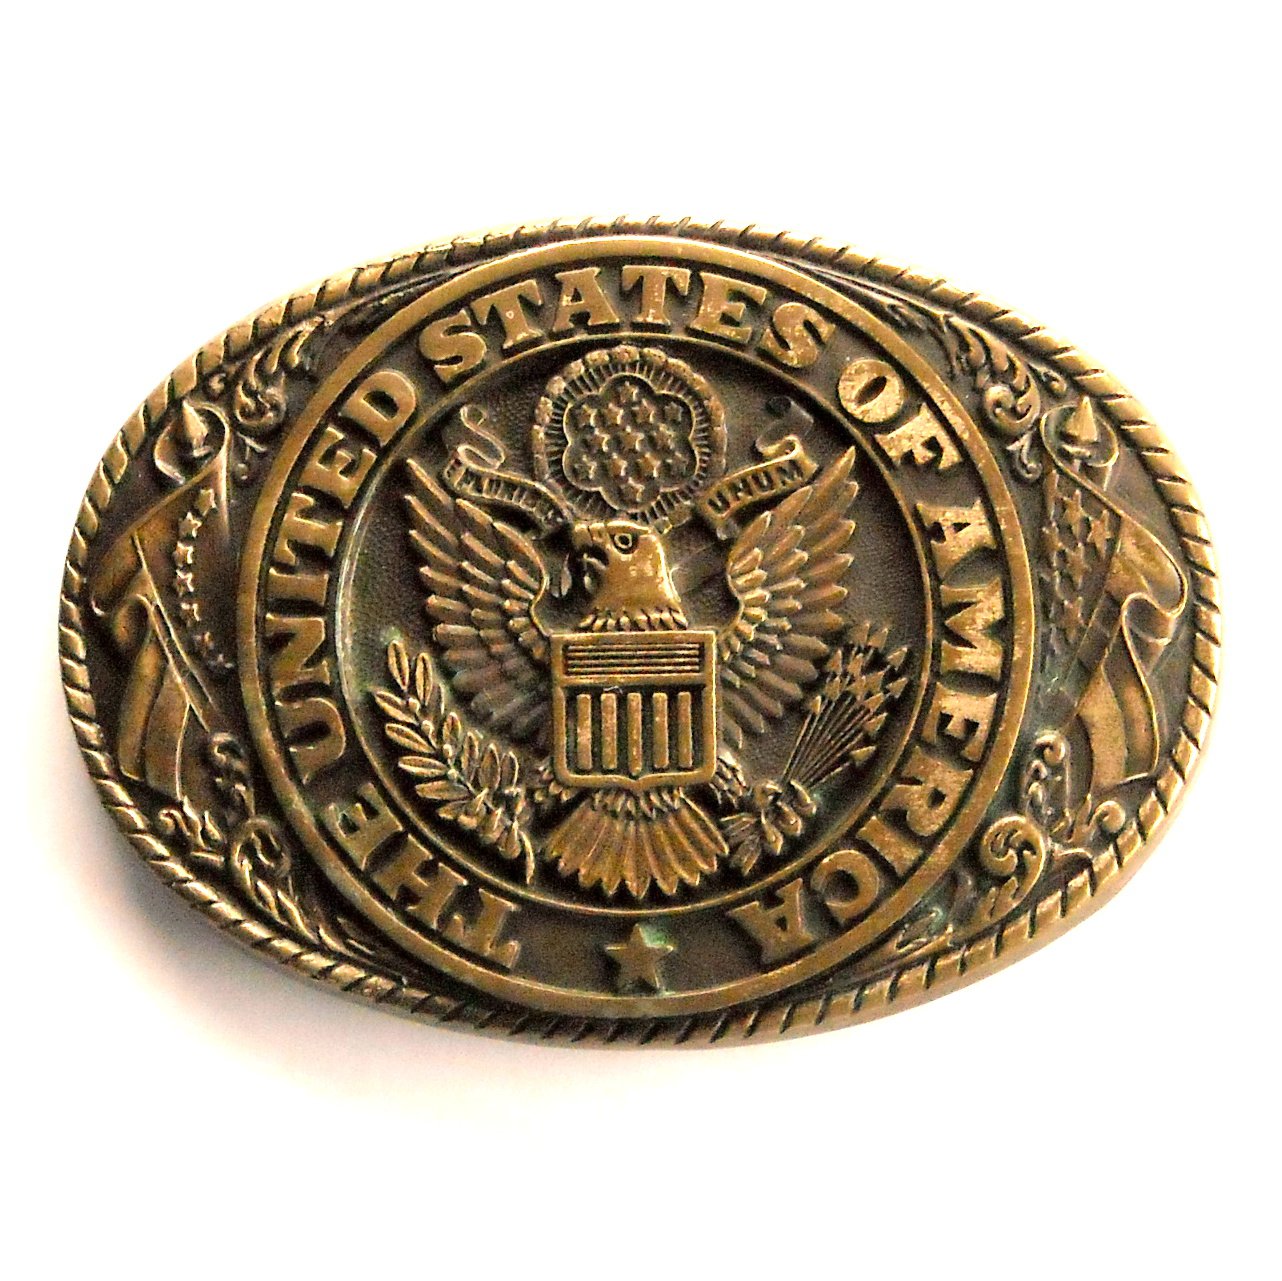 Tony Lama The Great Seal United States Of America Brass Belt Buckle